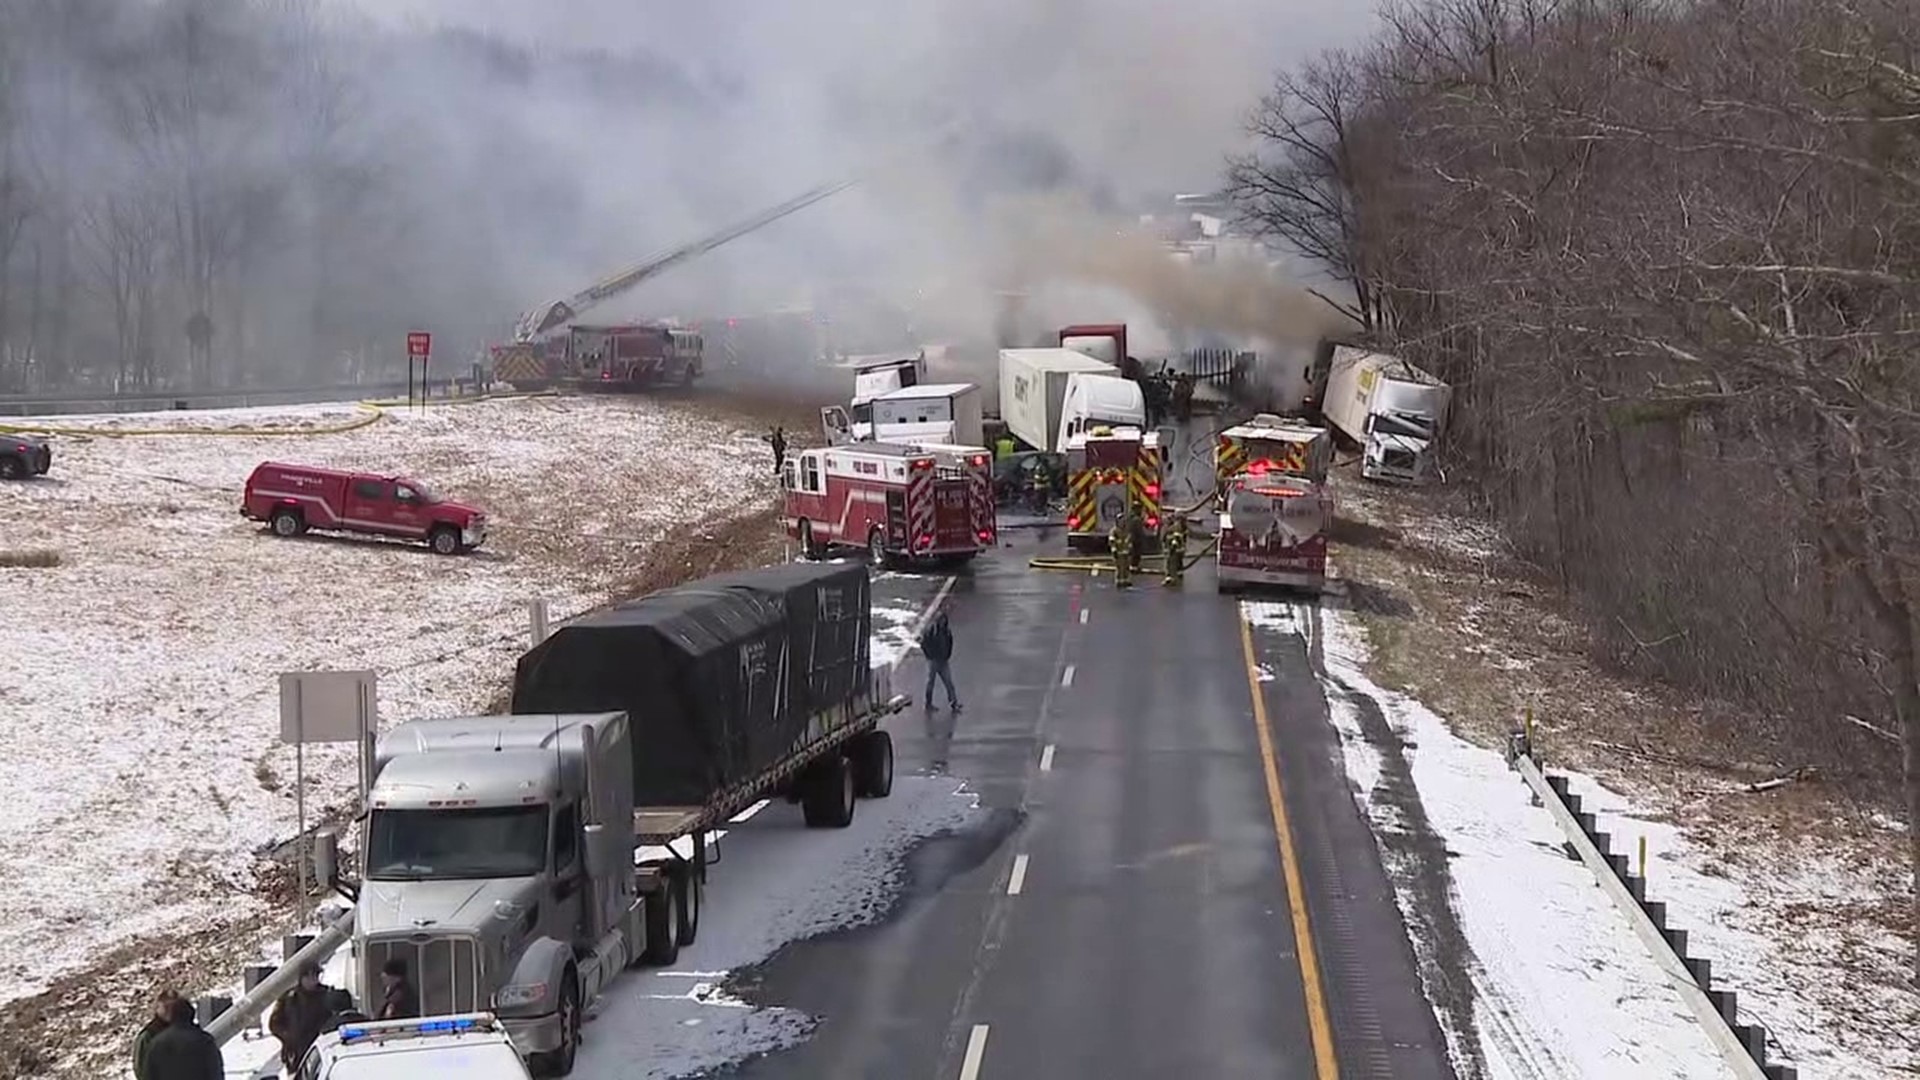 Interstate 81 north near Pottsville in Schuylkill County is now reopened after Monday's deadly wreck. Investigators said Wednesday that six people were killed.